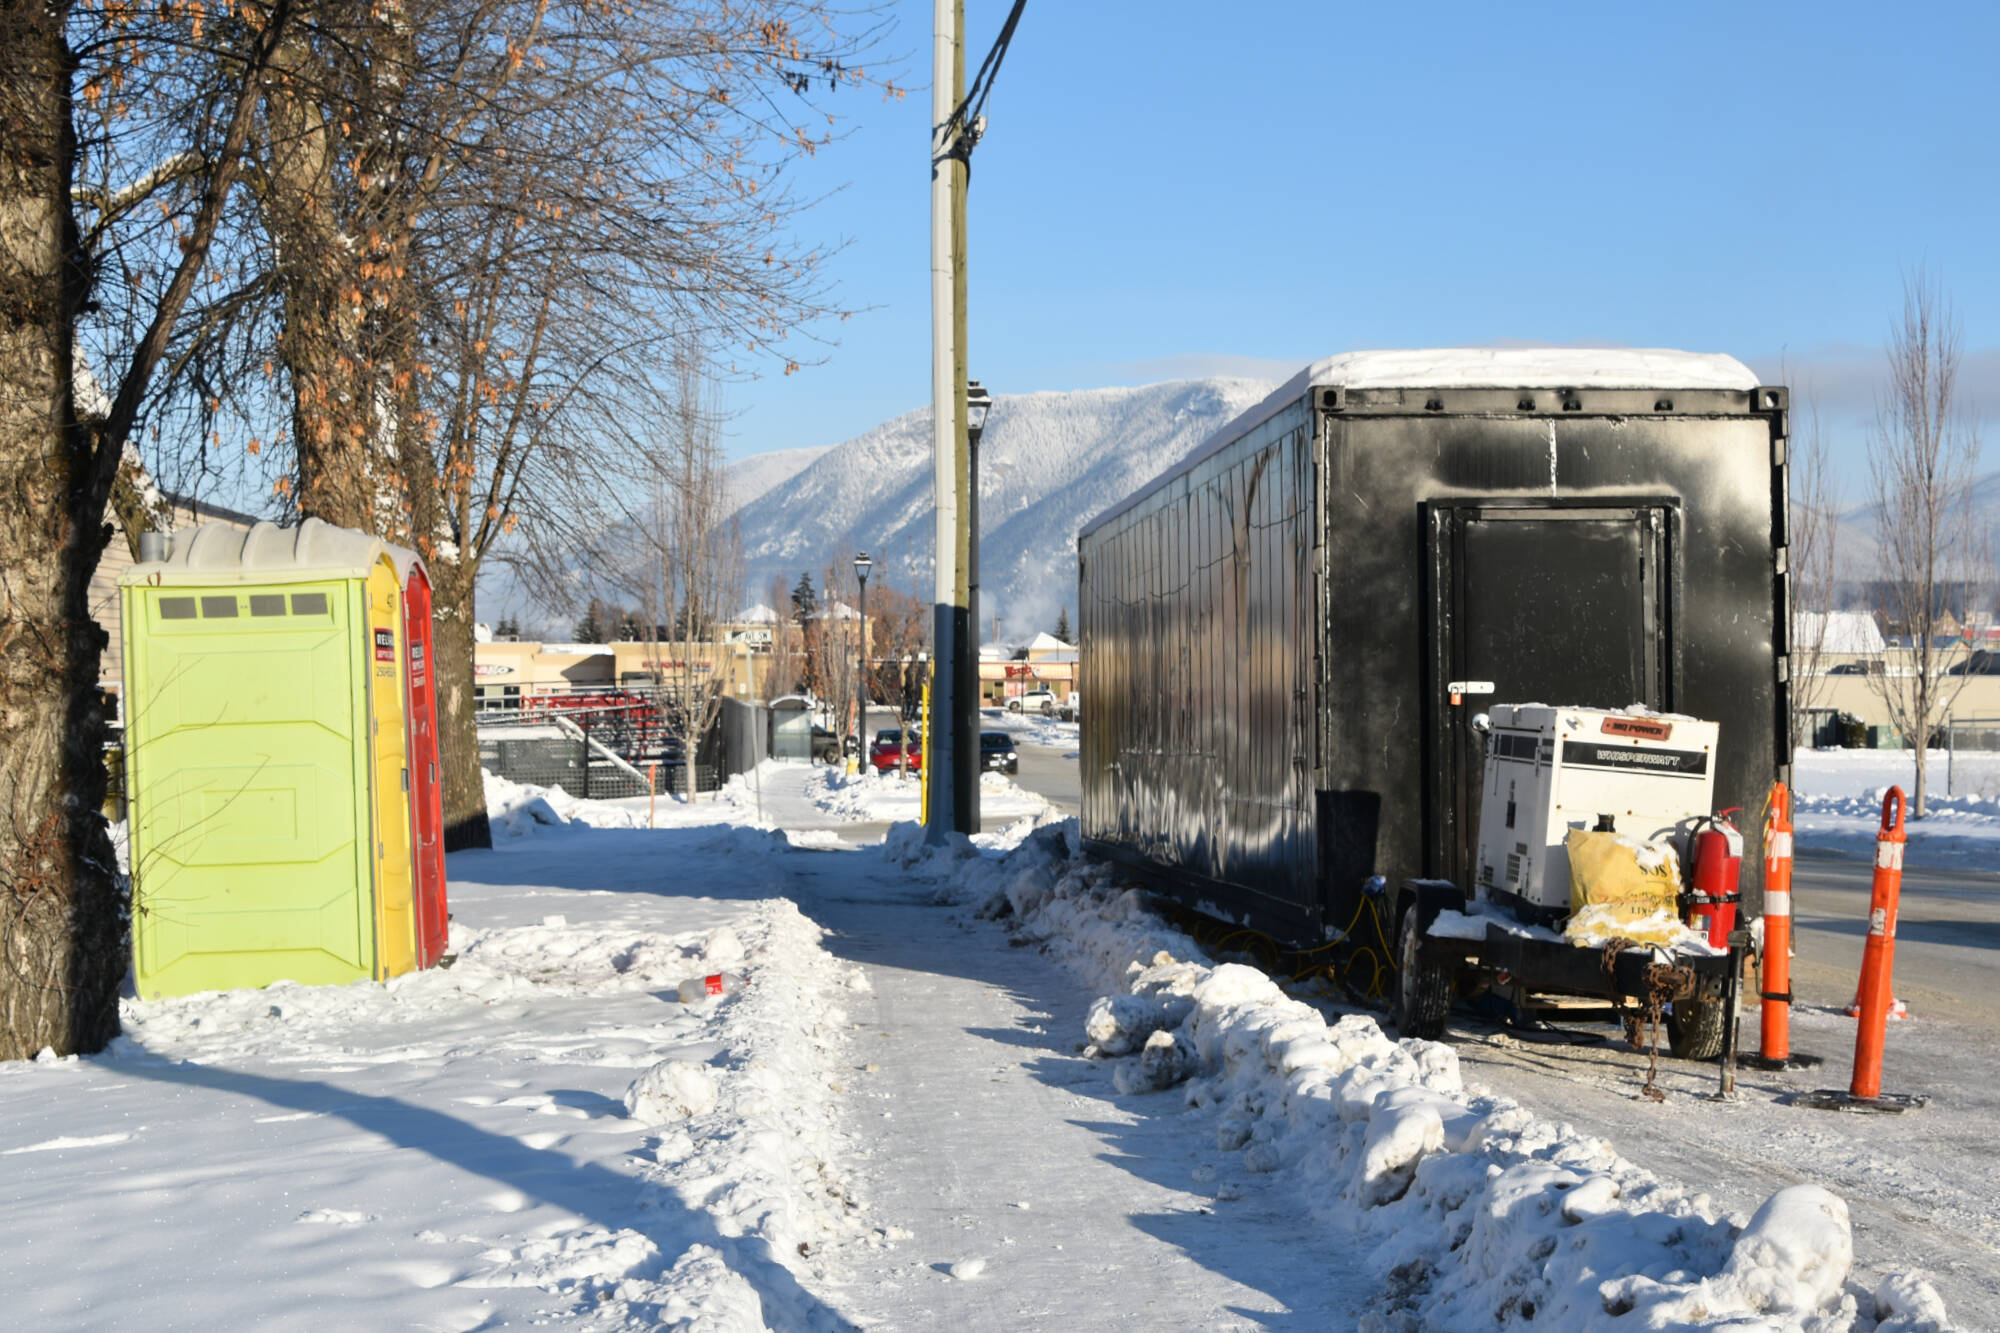 The new temporary winter shelter at the Downtown Activity Centre, 451 Shuswap St. S in Salmon Arm, will be open seven days a week, 8 p.m. to 6 a.m., from Jan. 19 to April 30. (Martha Wickett-Salmon Arm Observer)
A sea can, along with two porta potties, was set up along 3rd Street SW on Dec. 20, 2022. (File photo)